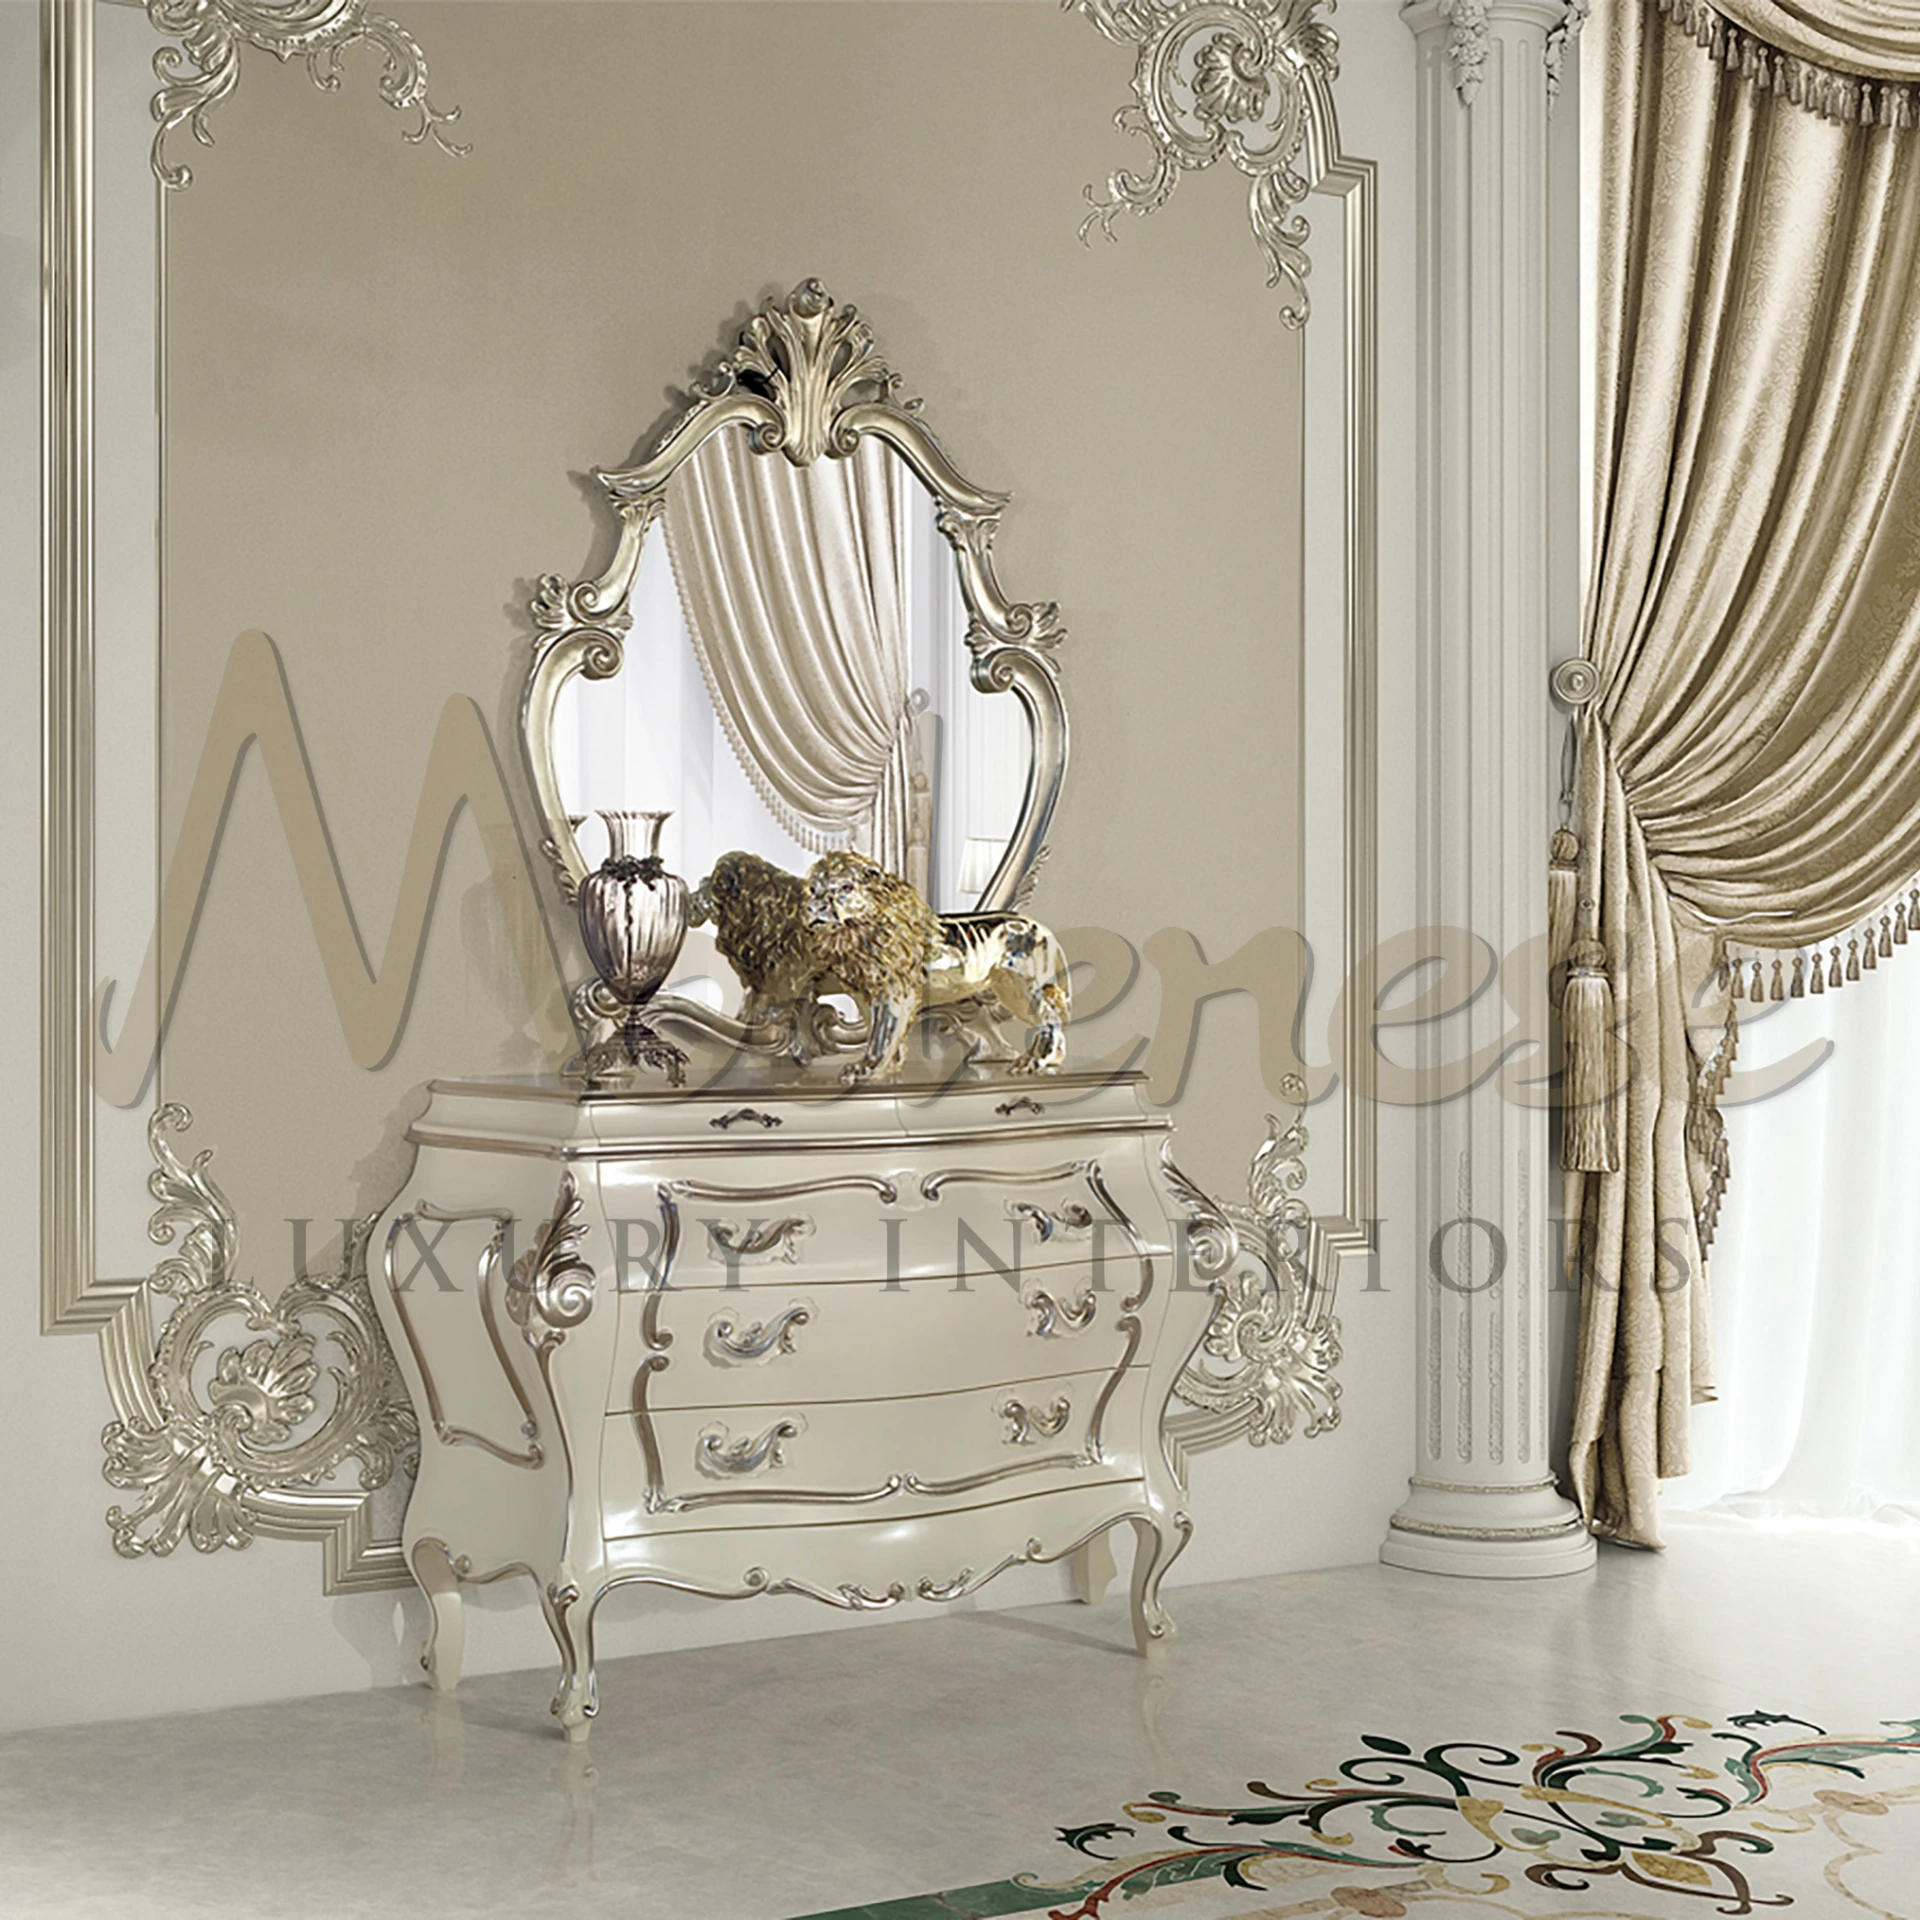 Glamorous silver commode with elegant curves and intricate carvings, topped with an artistic vase and metallic lion statue by Modenese Luxury Interiors